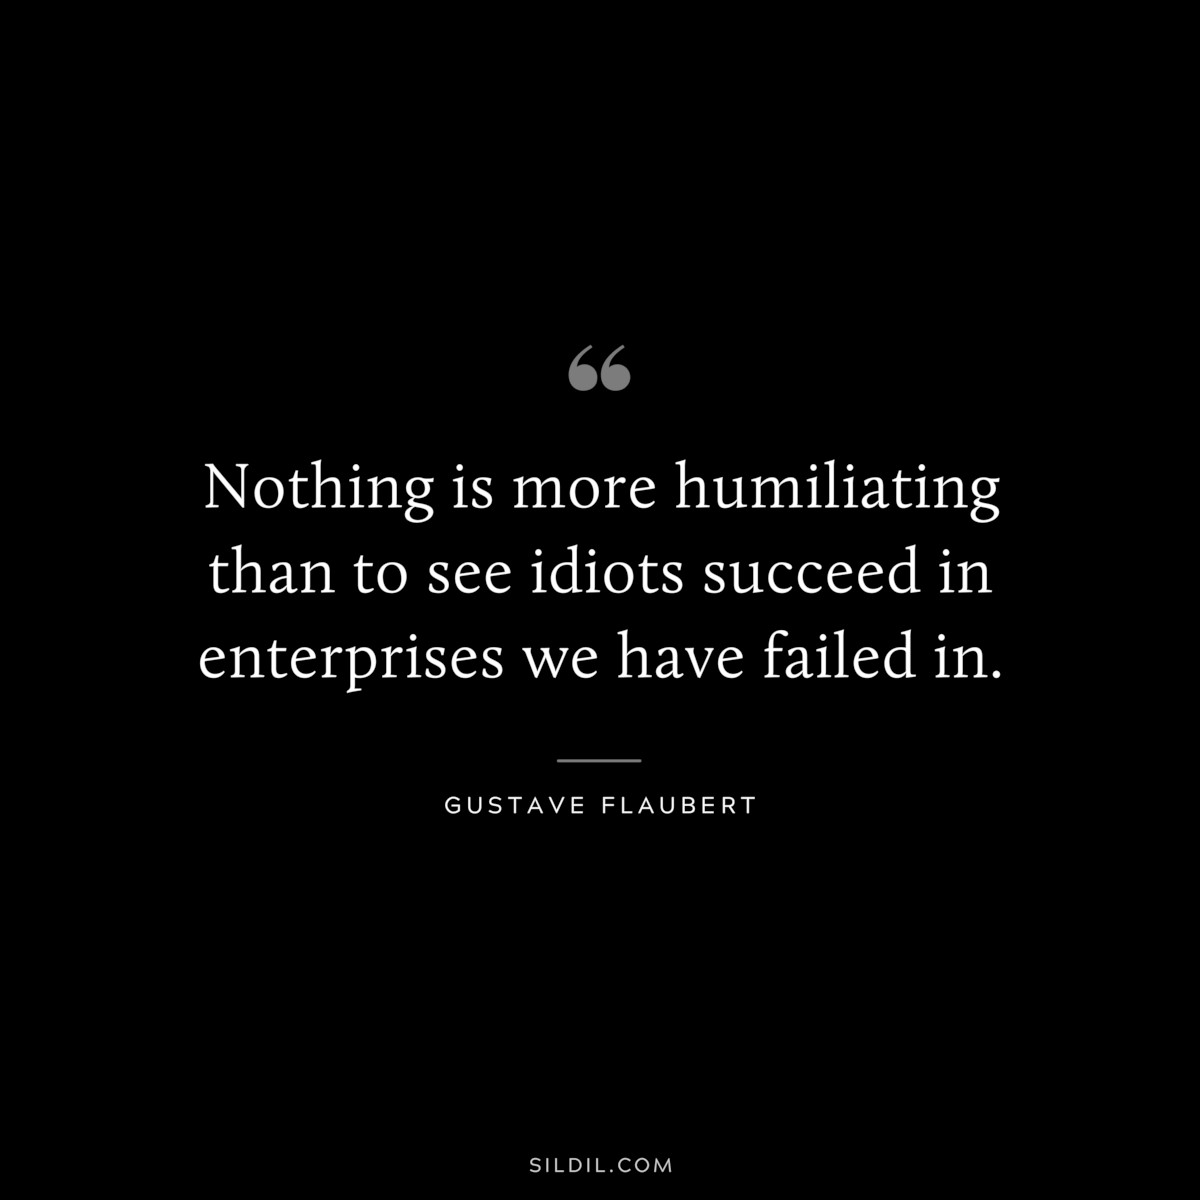 Nothing is more humiliating than to see idiots succeed in enterprises we have failed in. ― Gustave Flaubert